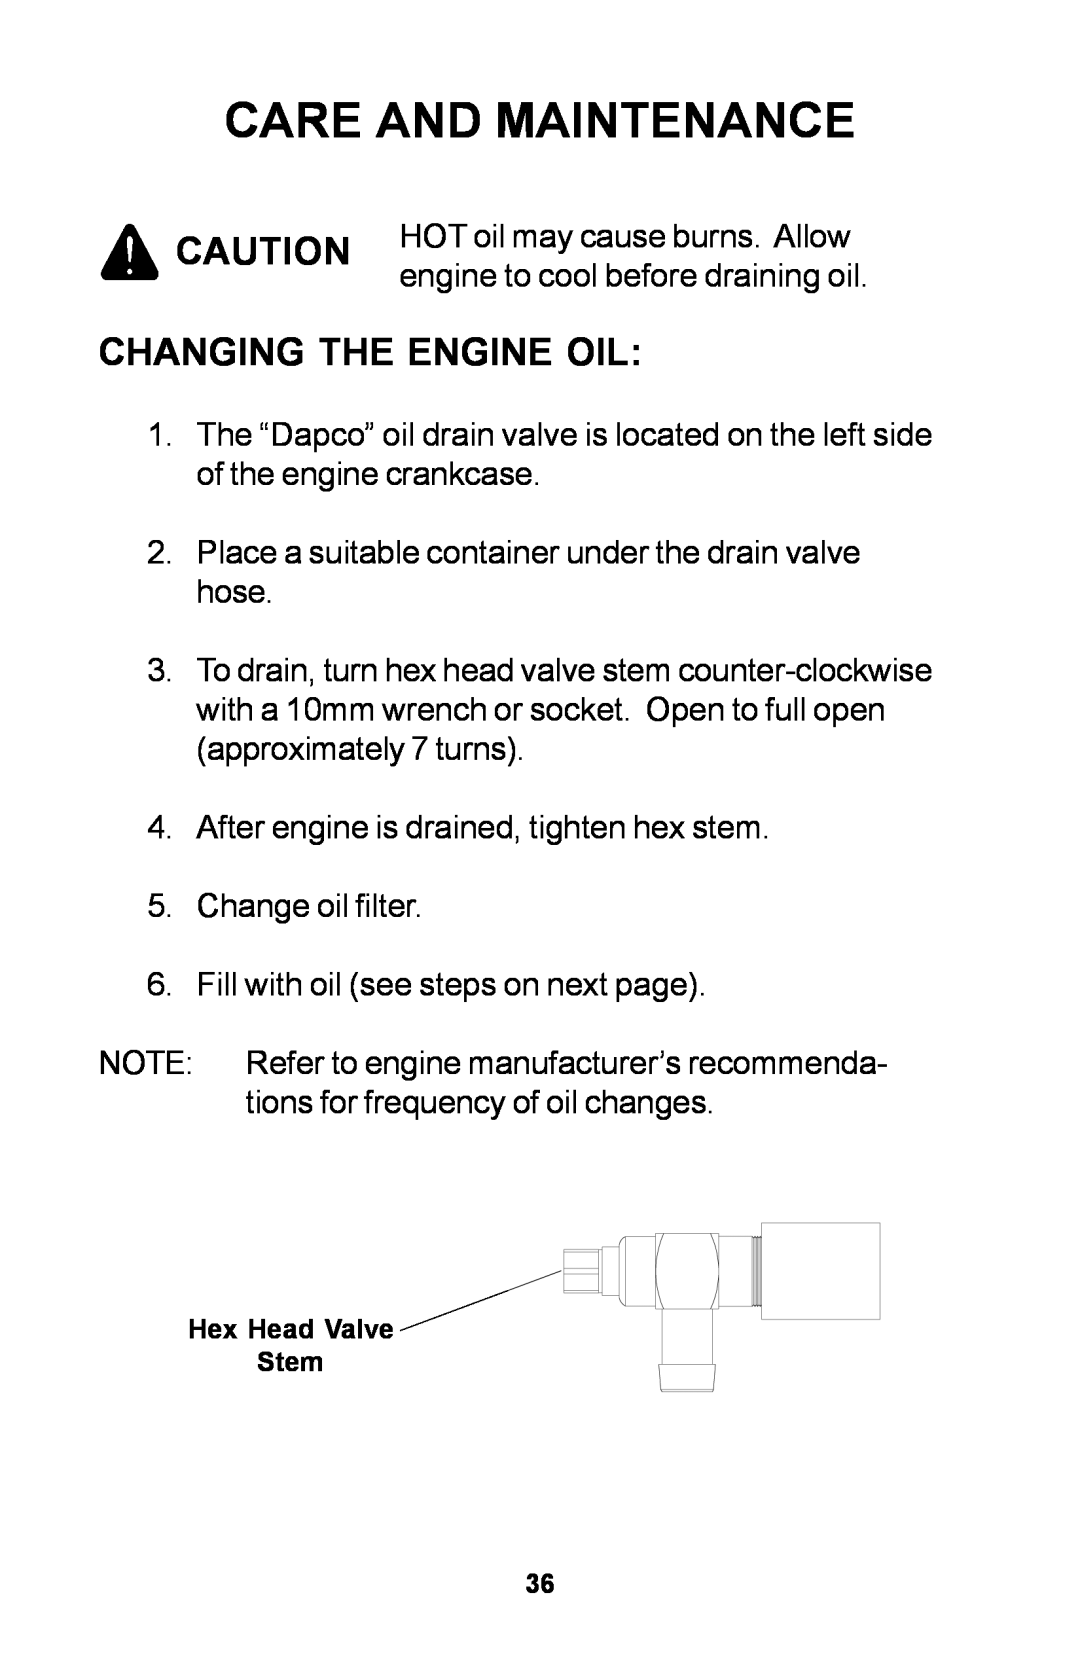 Dixon 30 manual Changing The Engine Oil, Care And Maintenance 